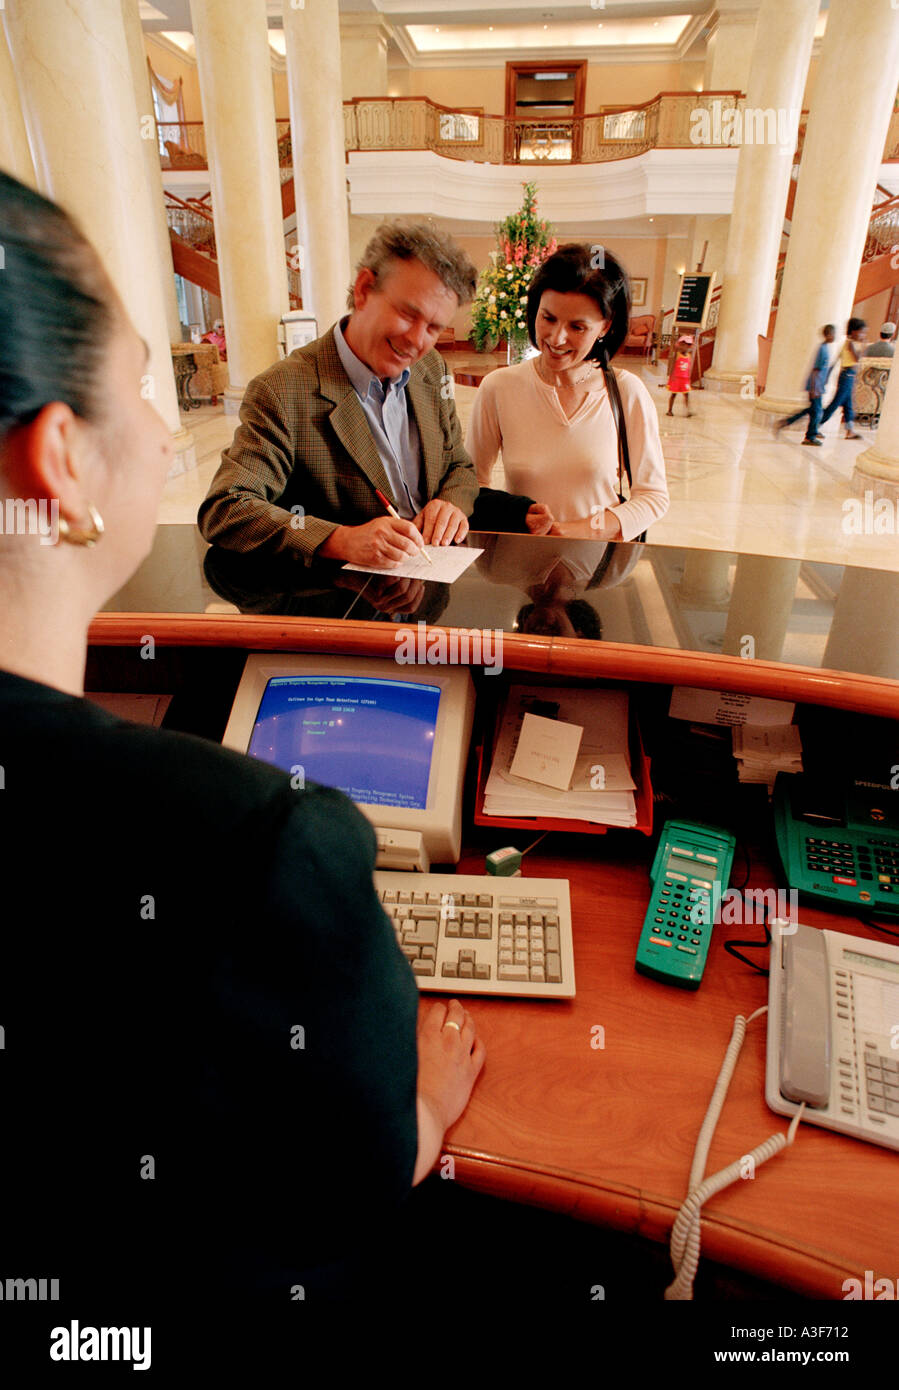 couple checking into hotel with receptionist in foreground Stock Photo